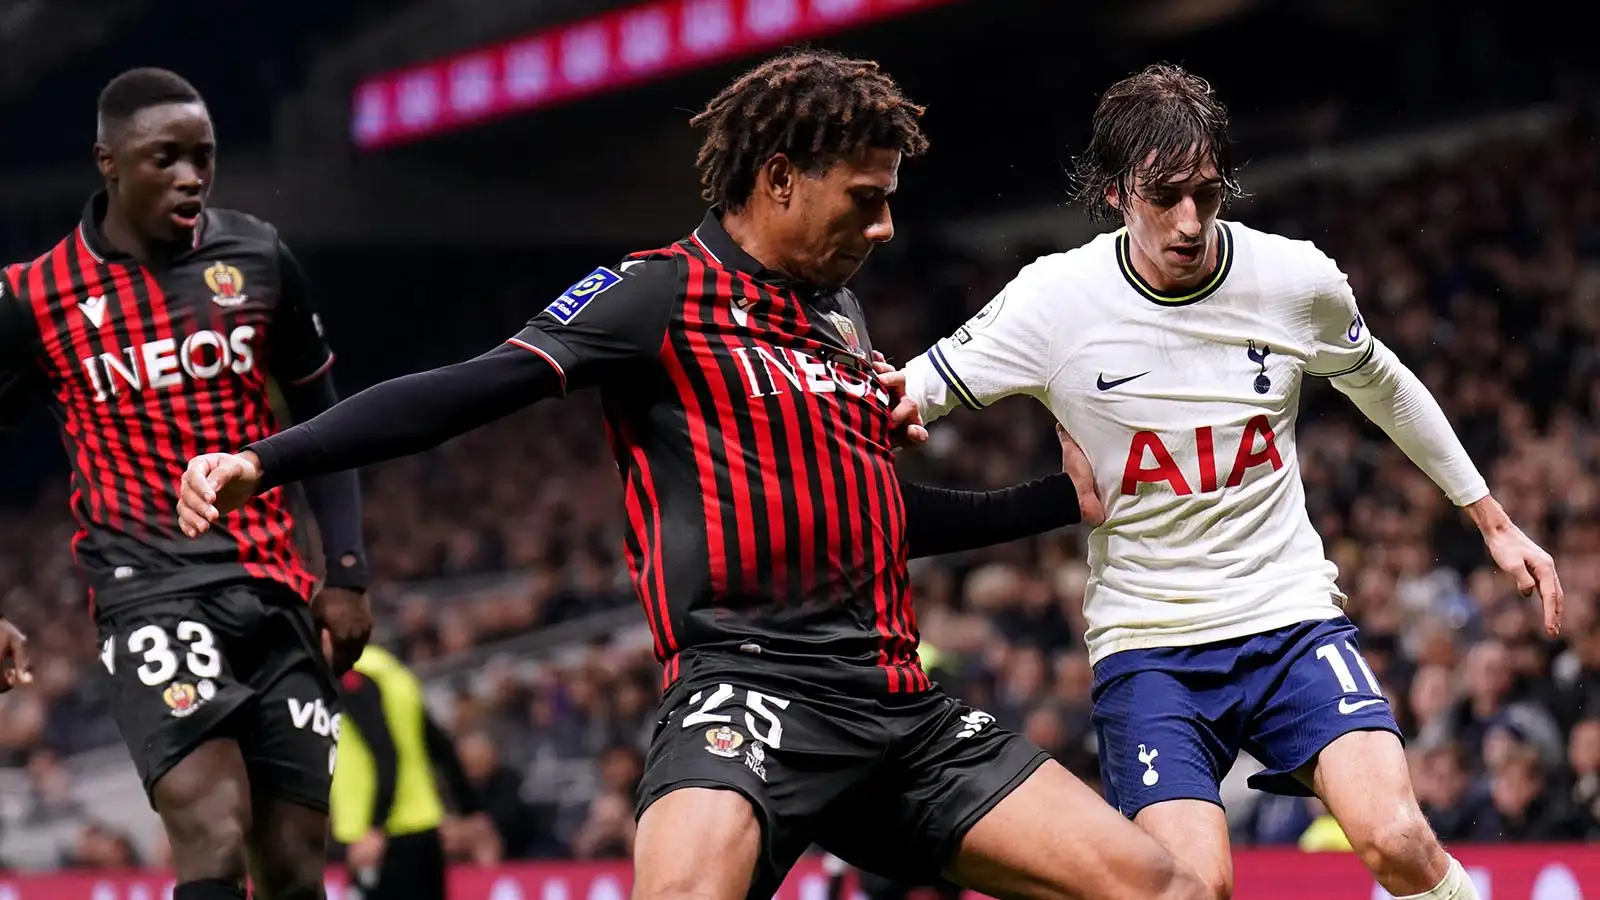 Tottenham Hotspur's Bryan Gil (right) and Nice's Jean-Clair Todibo battle for the ball during a friendly match at the Tottenham Hotspur Stadium, London. Picture date: Wednesday December 21, 2022